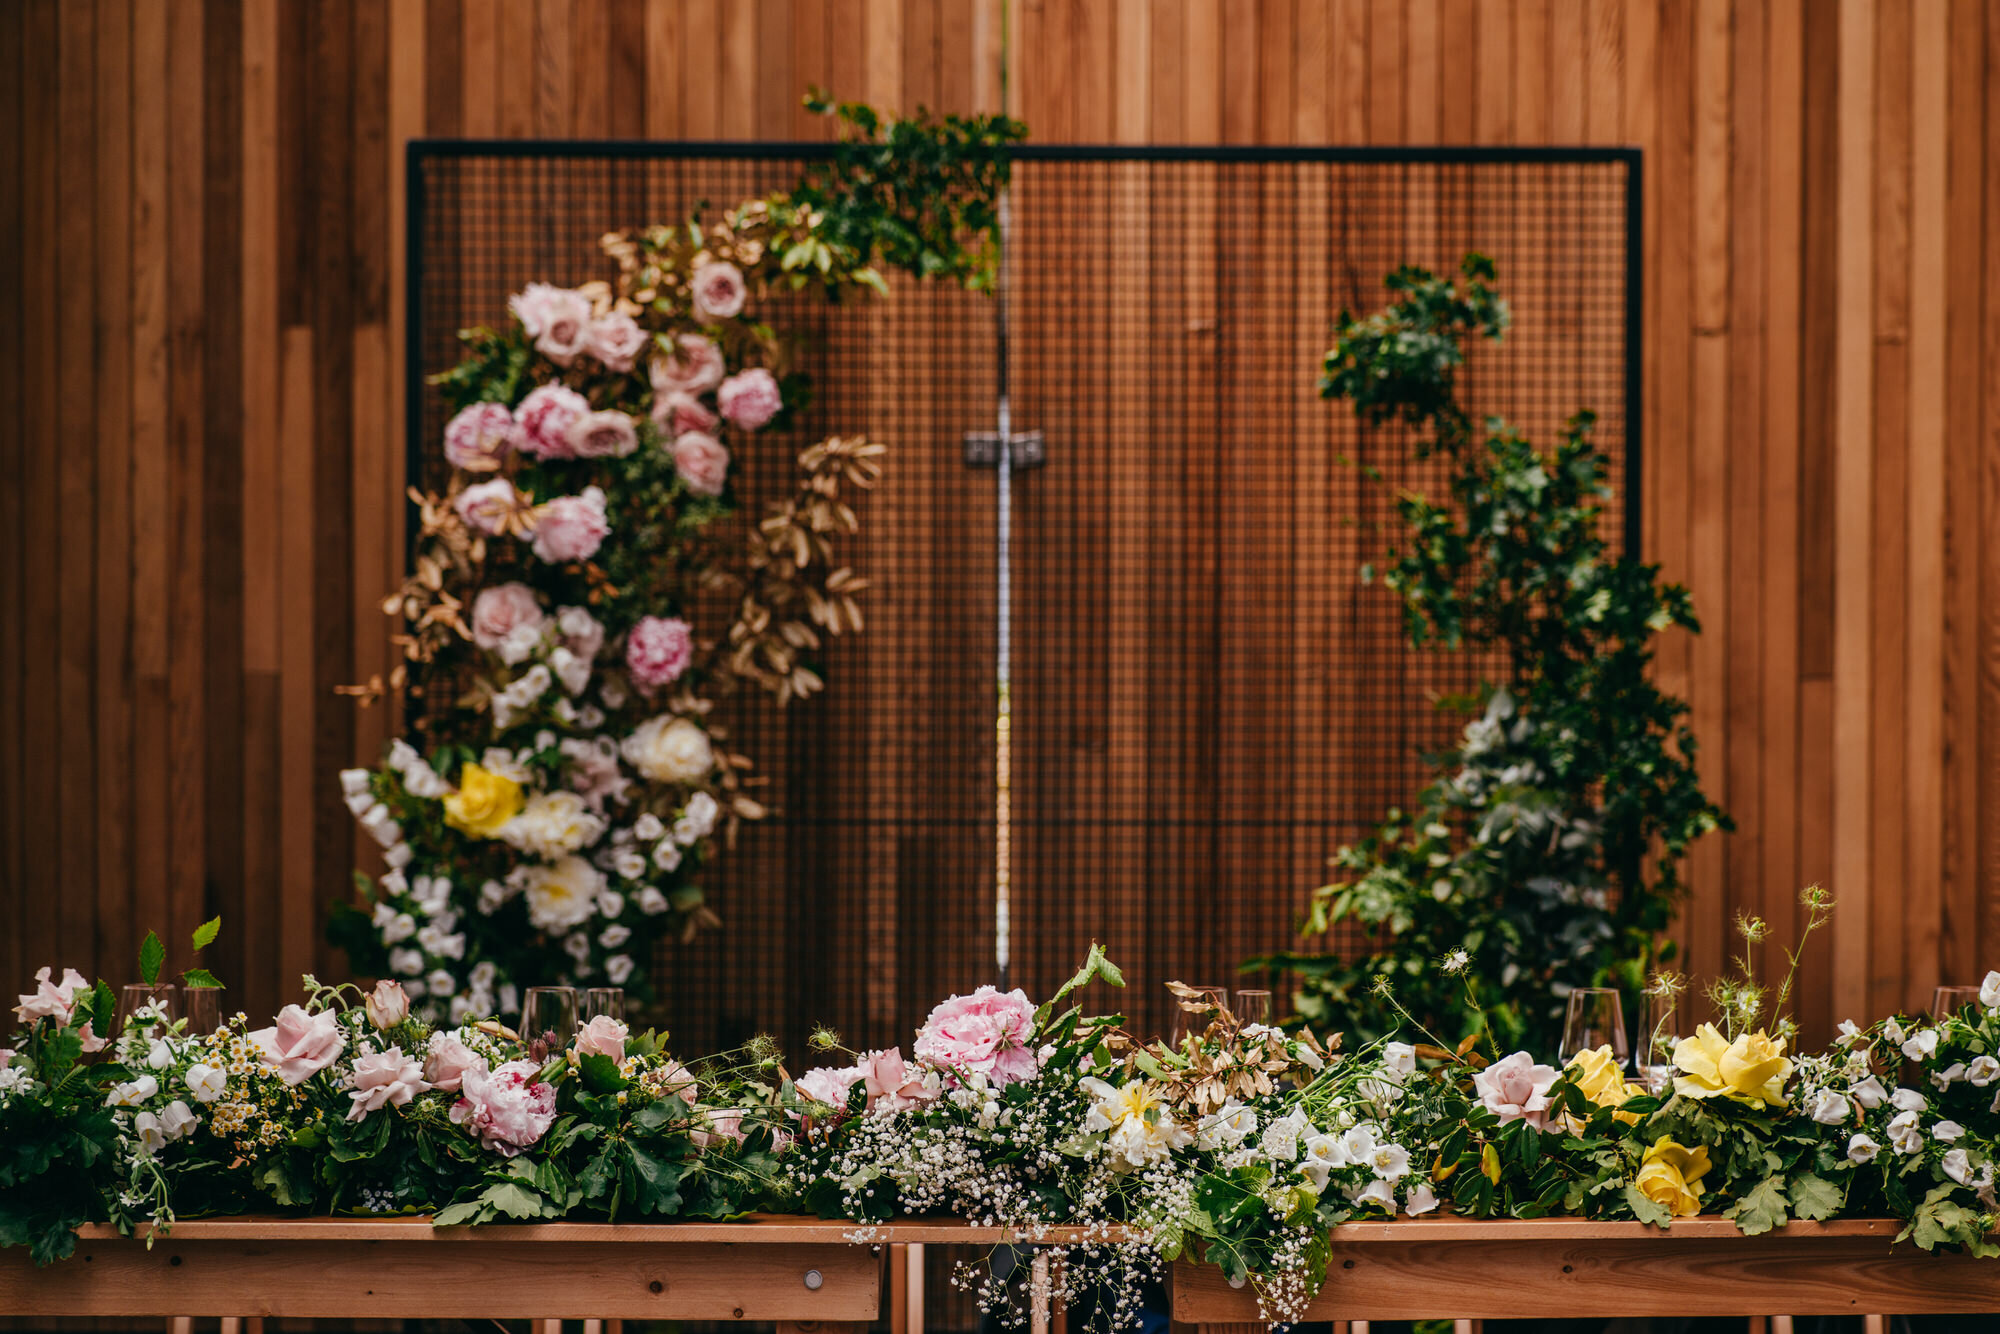 Branch and Bloom | Auckland Wedding Photographer | Auckland Wedding Videographer | Auckland Florist | Wedding Bouquet